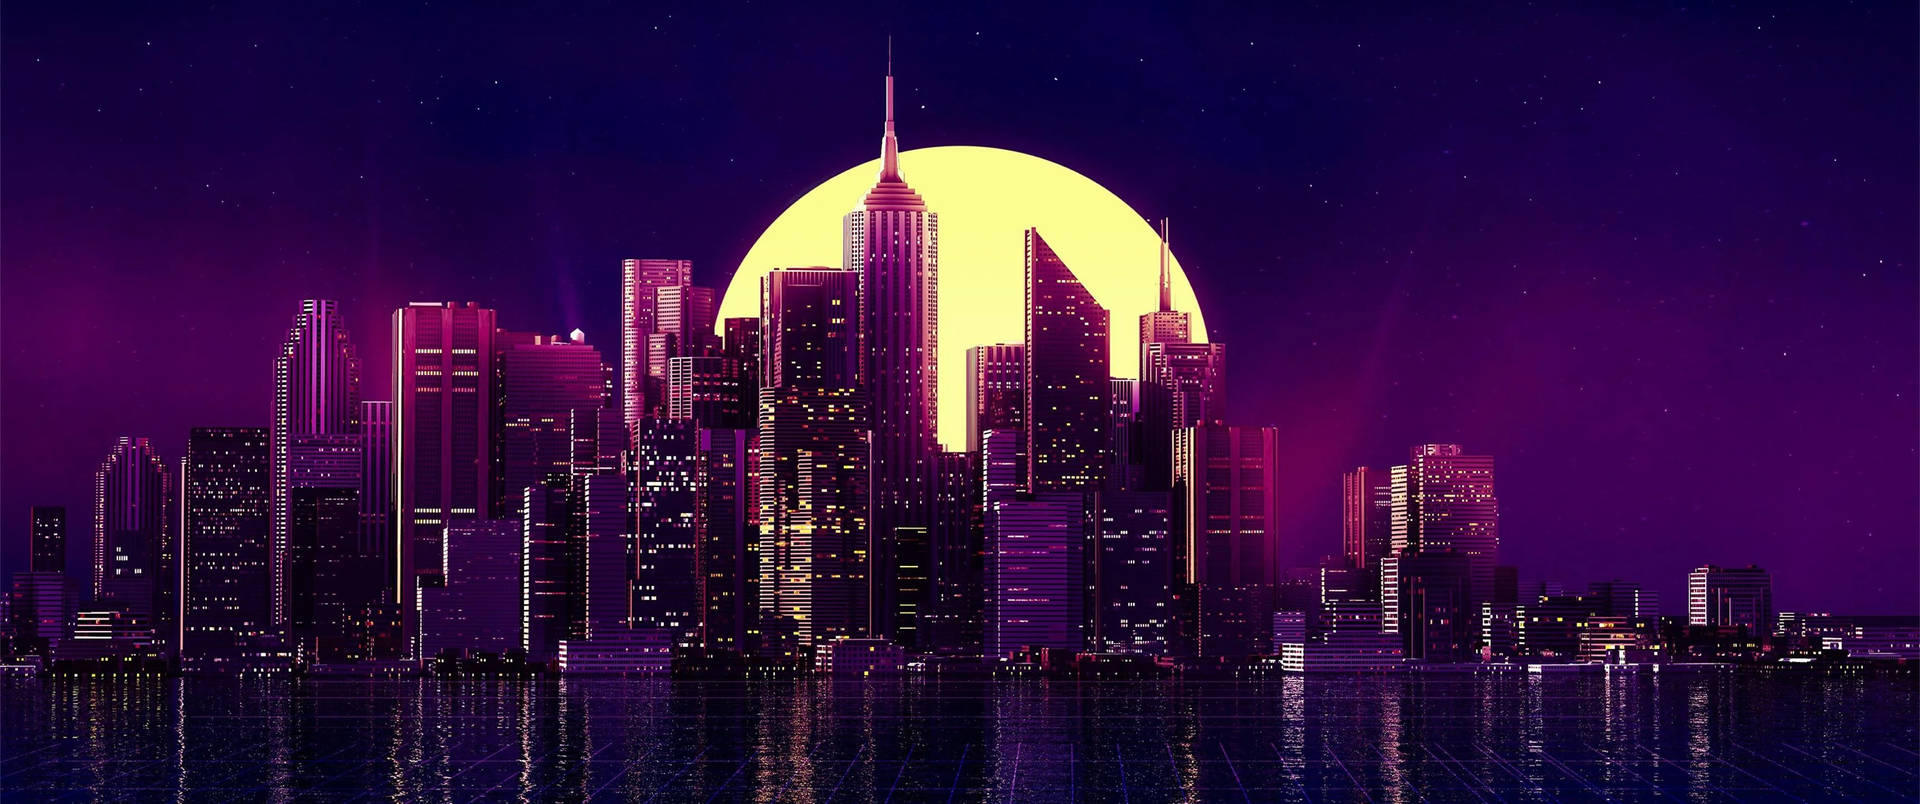 Purple 3440x1440 City With Full Moon Background